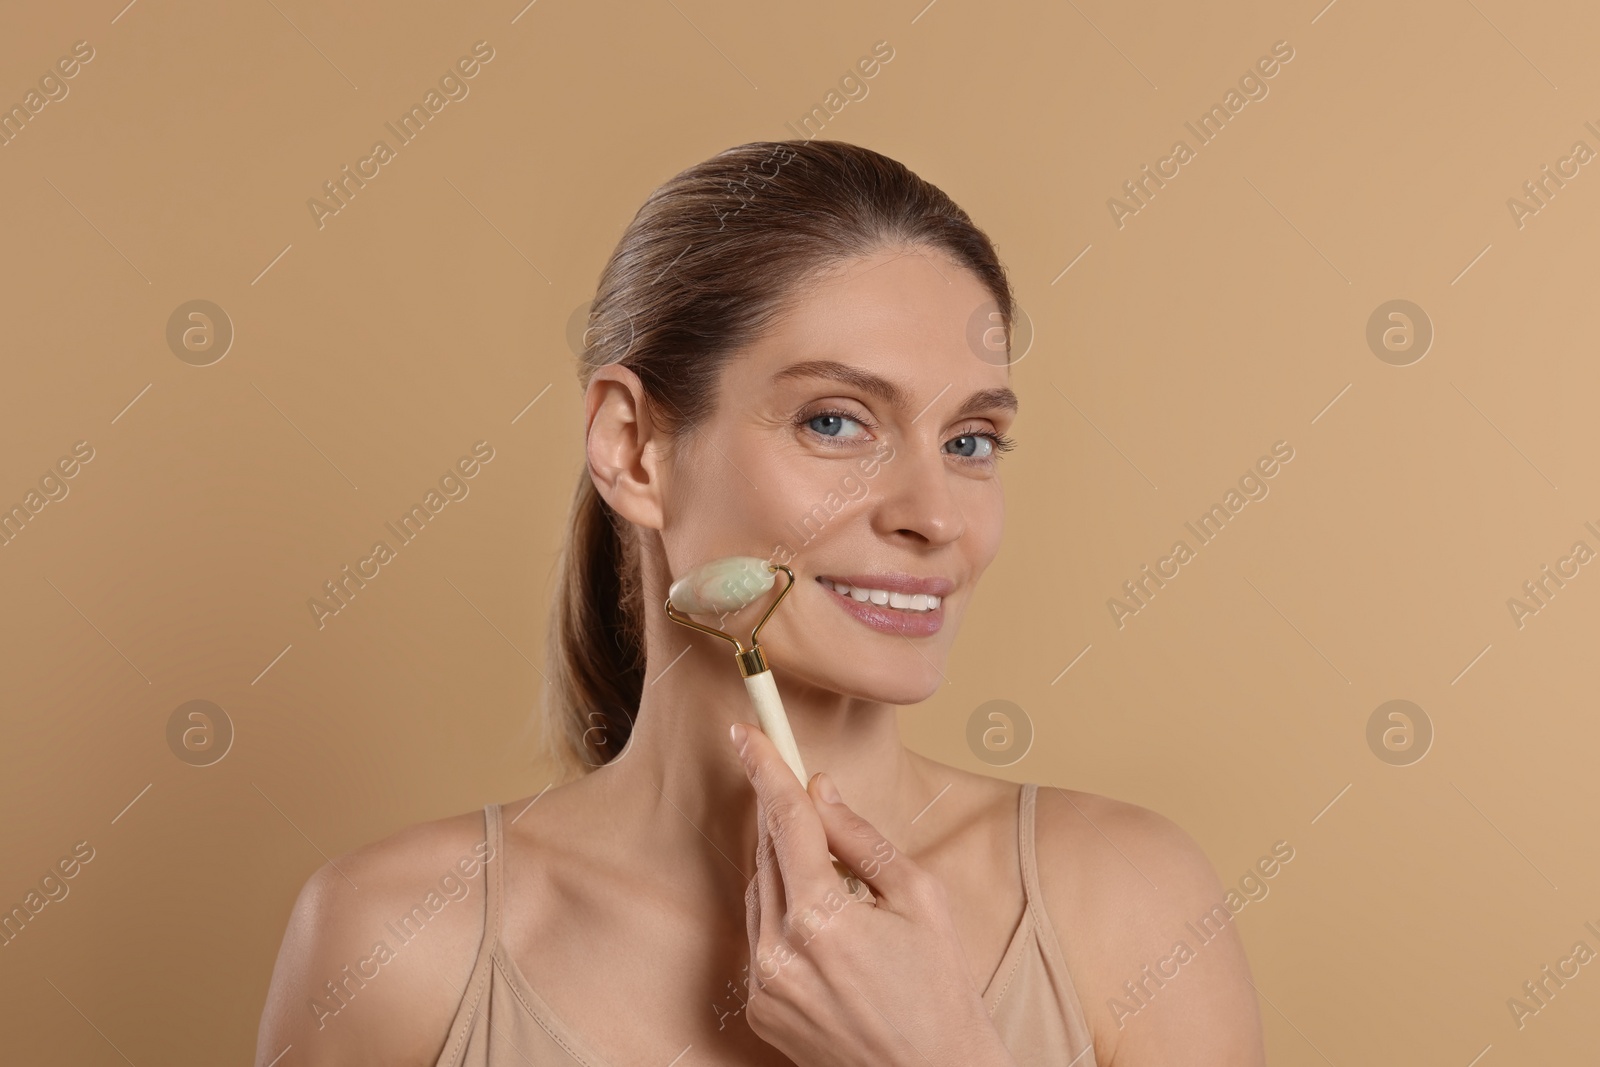 Photo of Woman massaging her face with jade roller on beige background